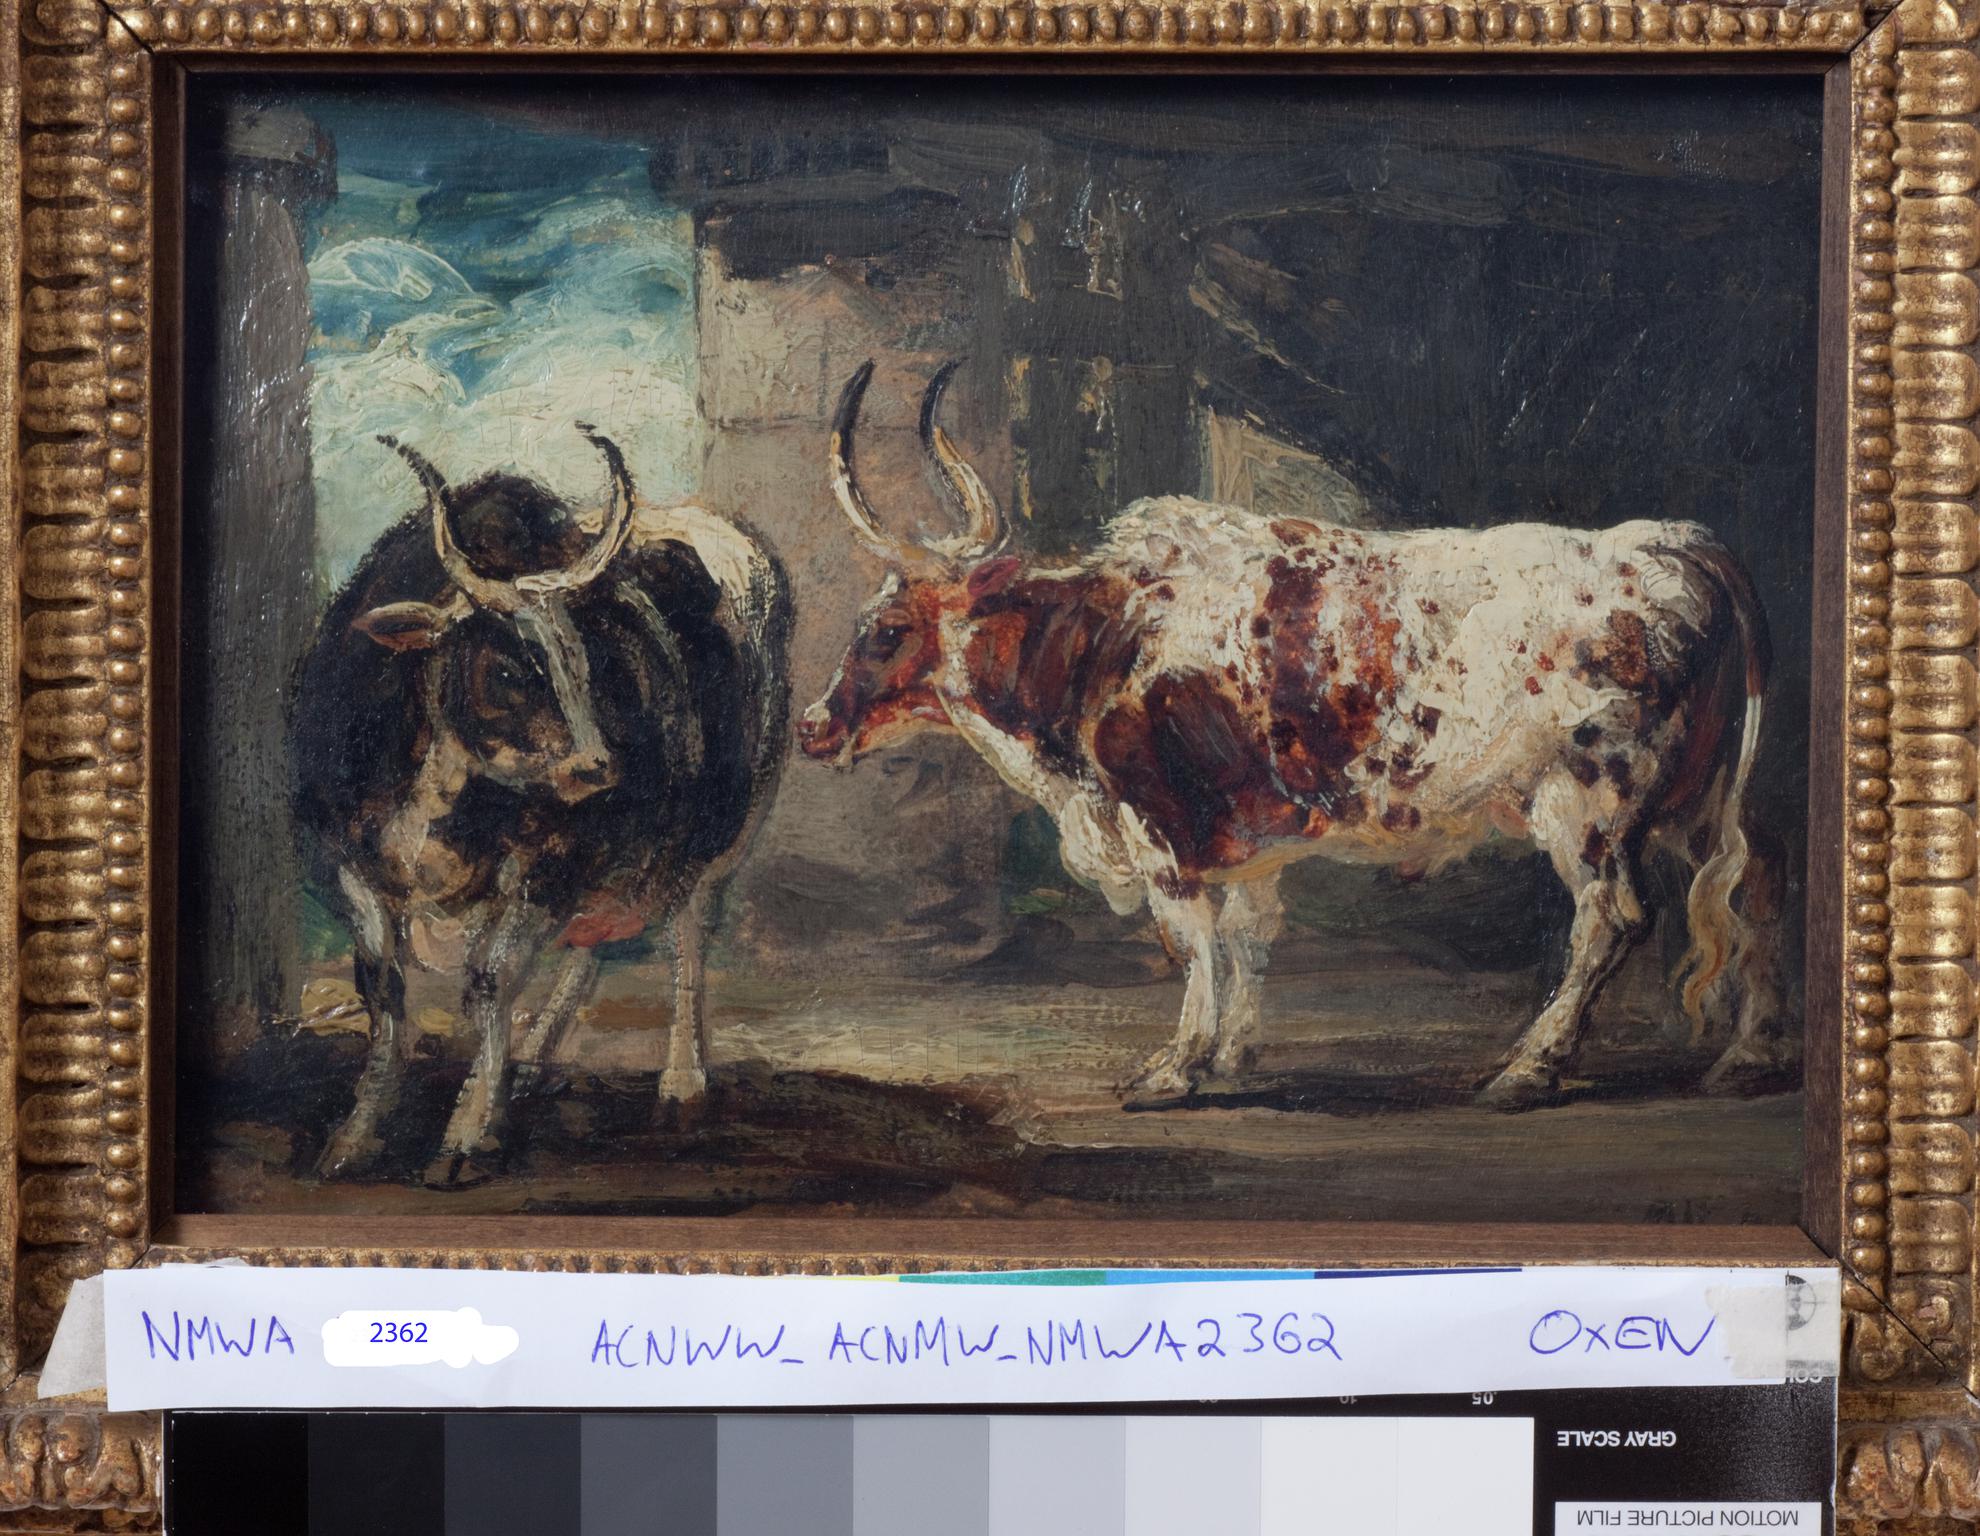 Two extraordinary oxen, the property of the Earl of Powis, in a barn